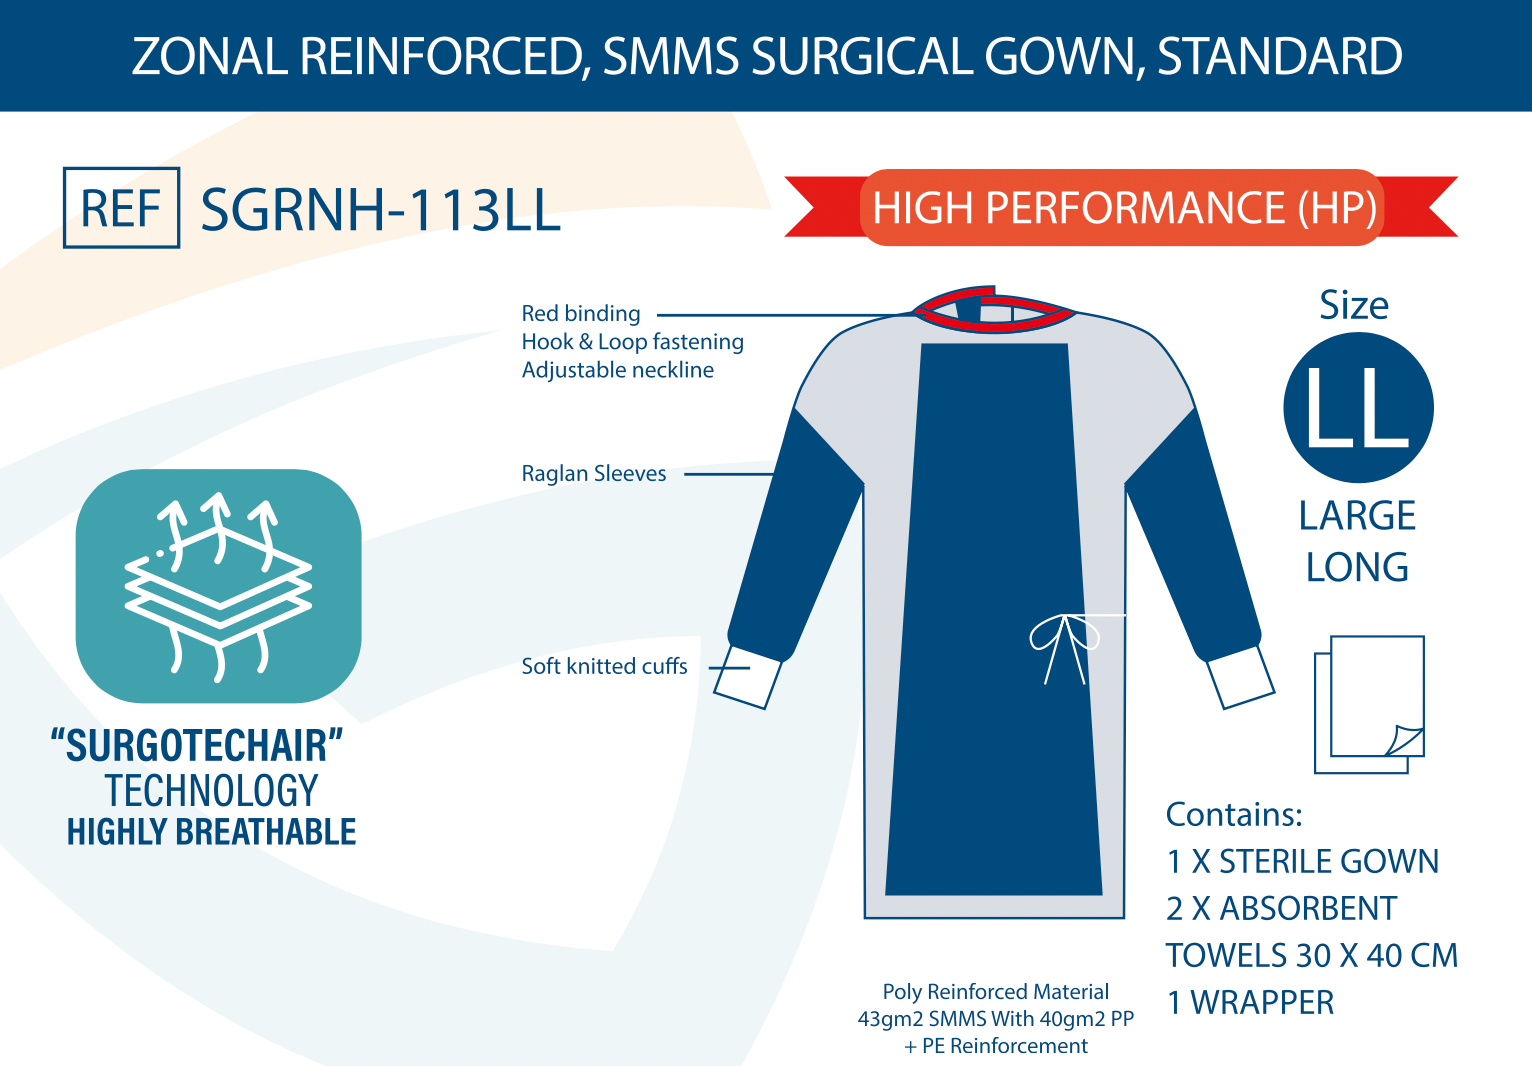 Case 40 Zonal Reinforced Sterile Surgical Gown Double Wrapped with 2 Hand Towels 30 x 40 cm 43gsm SMMS BODY with 40g PP & PE Reinforcement Fluid Alcohol Water Repellent hook and loop fastening Adjustable neckline Raglan Sleeves Size Large Long LL EN13795